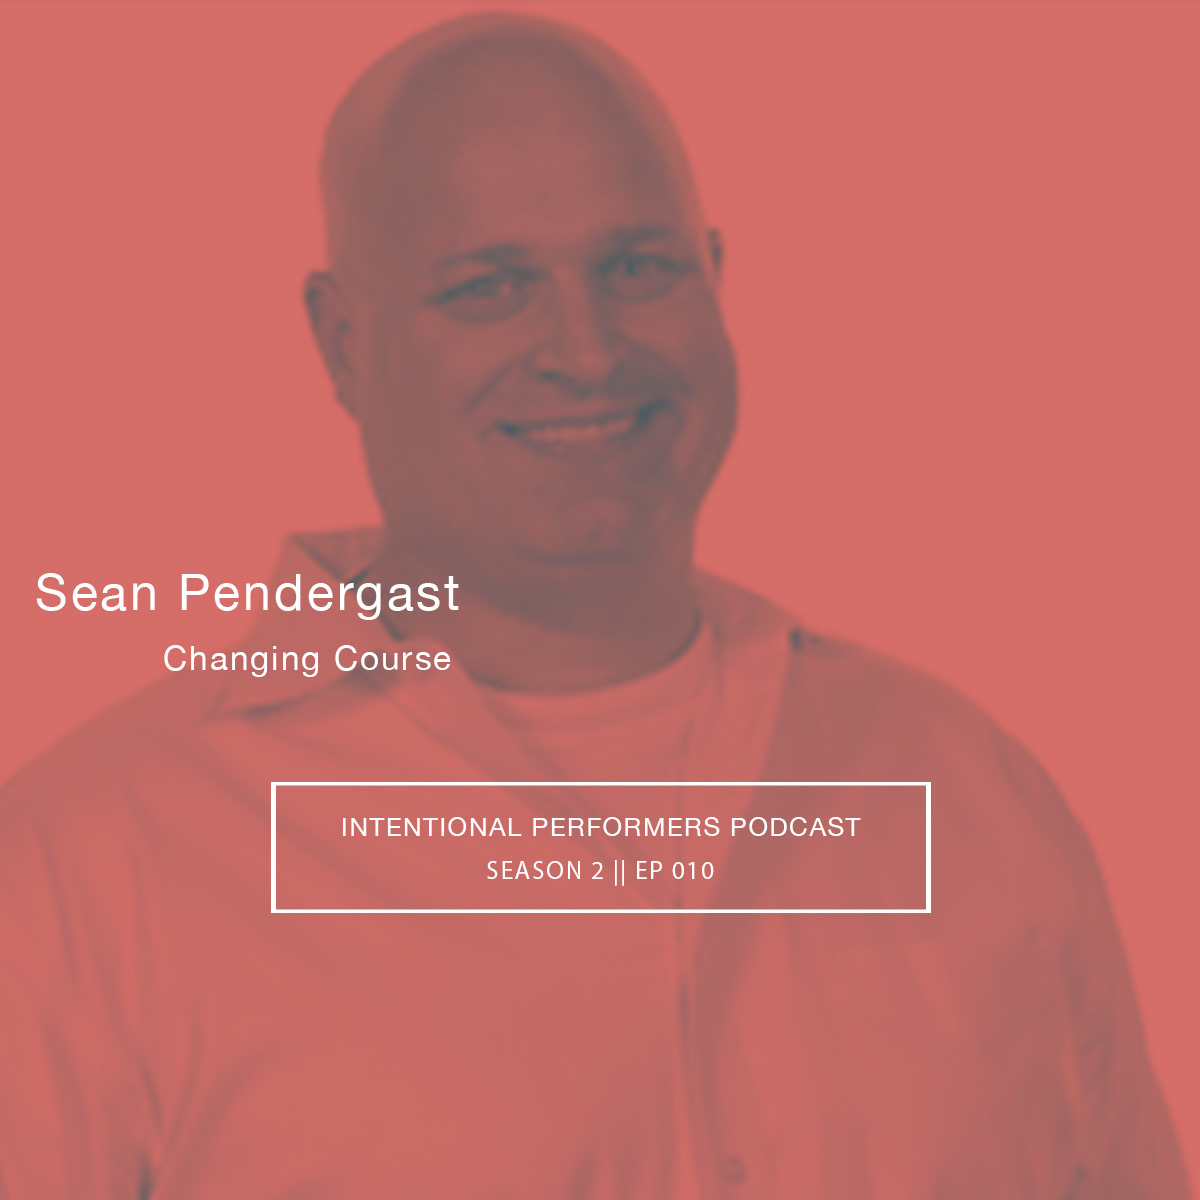 Sean Pendergast on Changing Course